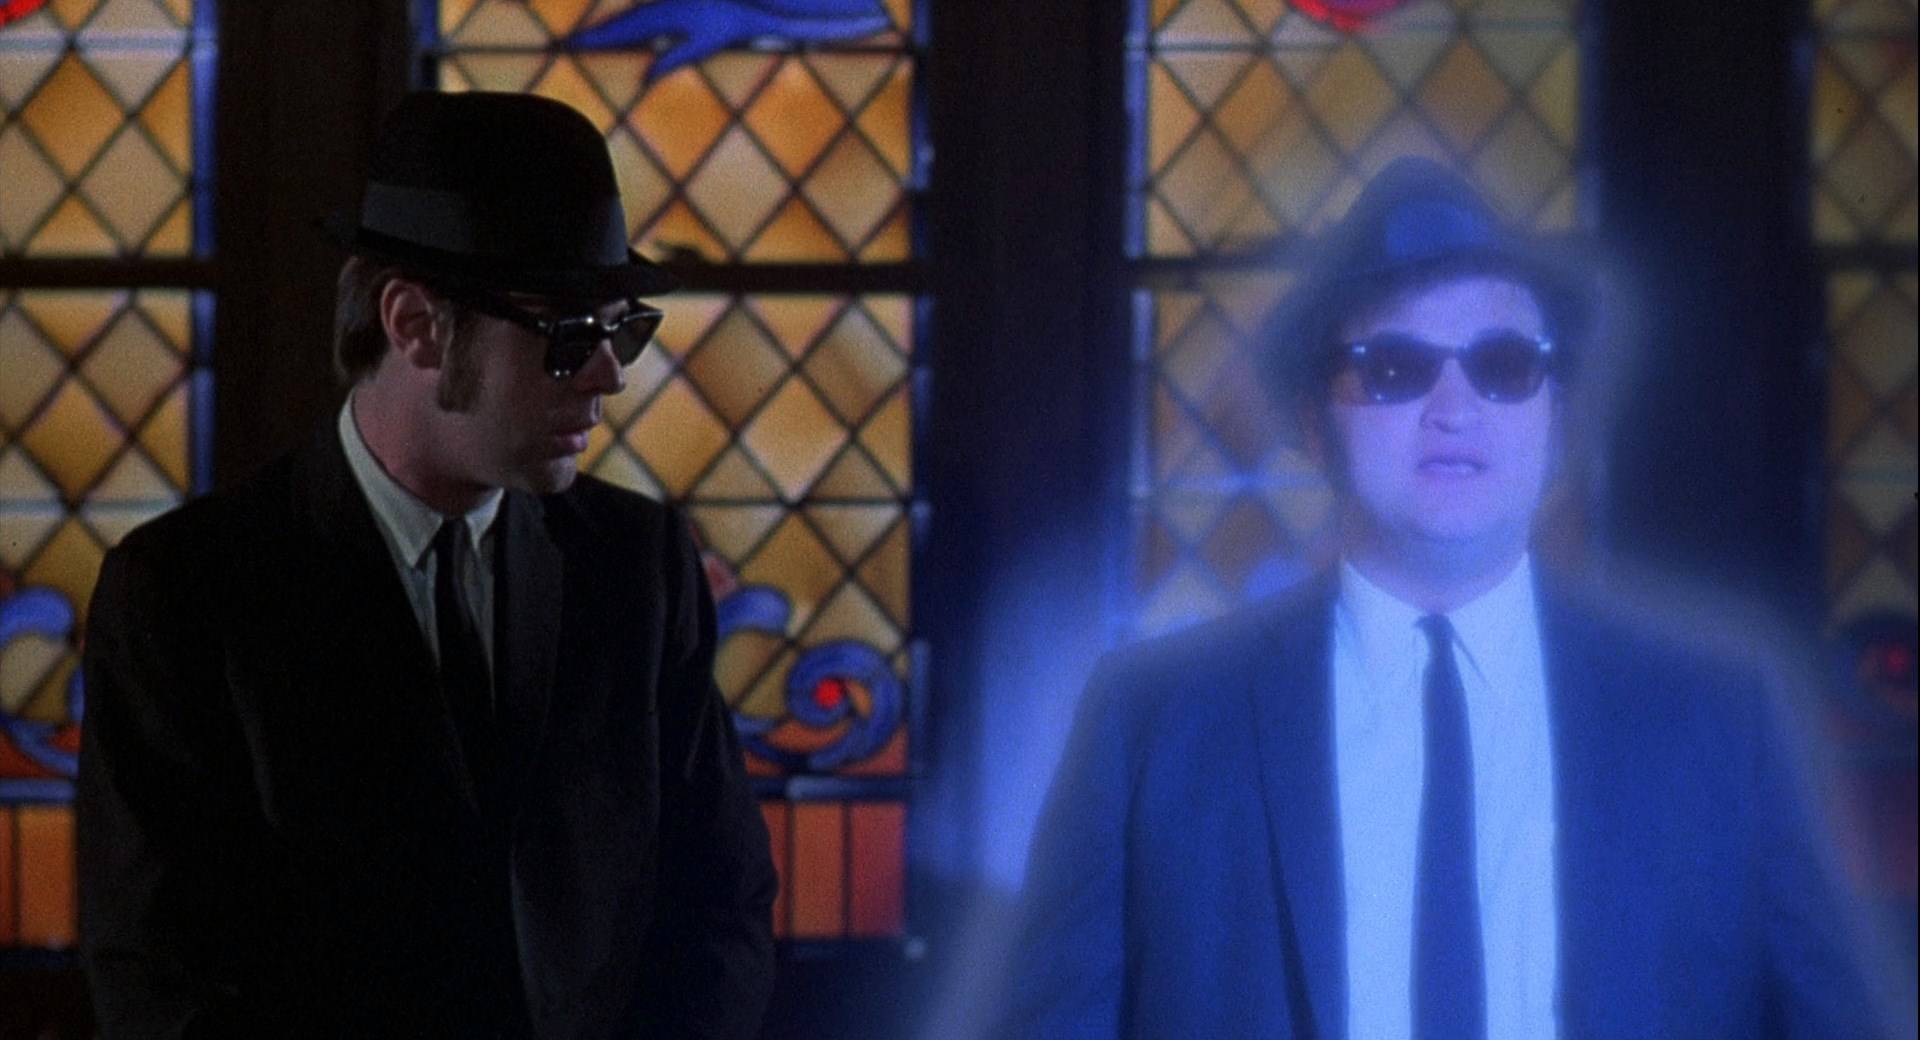 The Blues Brothers (1980) [Extended Cut]